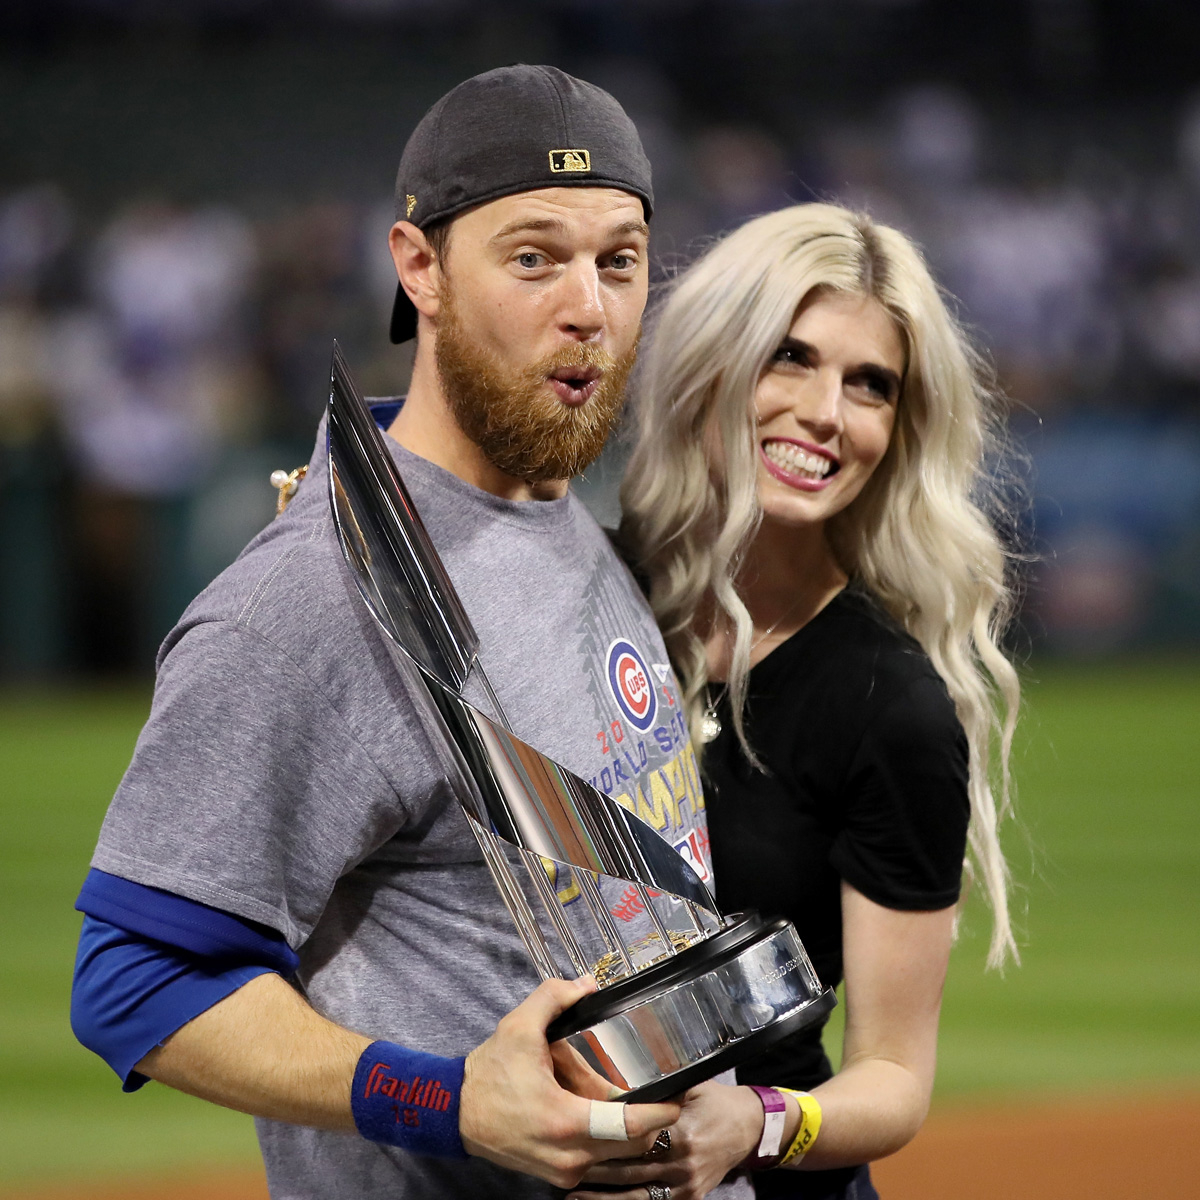 MLB Star Ben Zobrist Accuses Pastor of Having an Affair With His Wife in  Lawsuit: Photo 4575024, Ben Zobrist, Byron Yawn, Julianna Zobrist, MLB  Photos